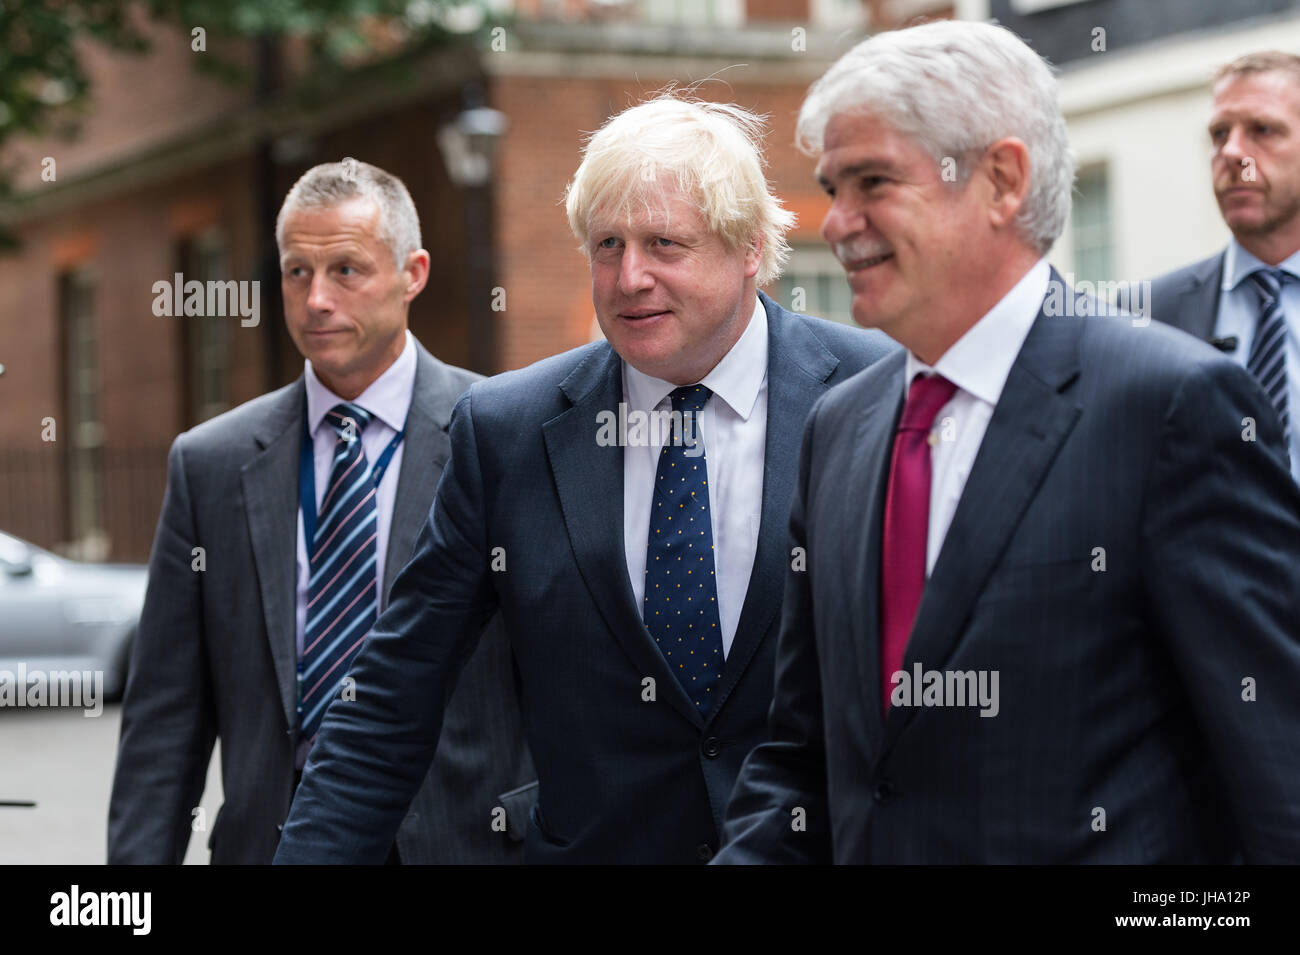 London, UK. 13th July 2017. Boris Johnson, the Secretary of State for Foreign Affairs (C) and Alfonso Dastis, Minister of Foreign Affairs of Spain (R), leave 10 Downing Street after a meeting between British Prime Minister Theresa May and the King Felipe VI of Spain. The King and Queen of Spain pay a state visit to the United Kingdom. Credit: Wiktor Szymanowicz/Alamy Live News Stock Photo